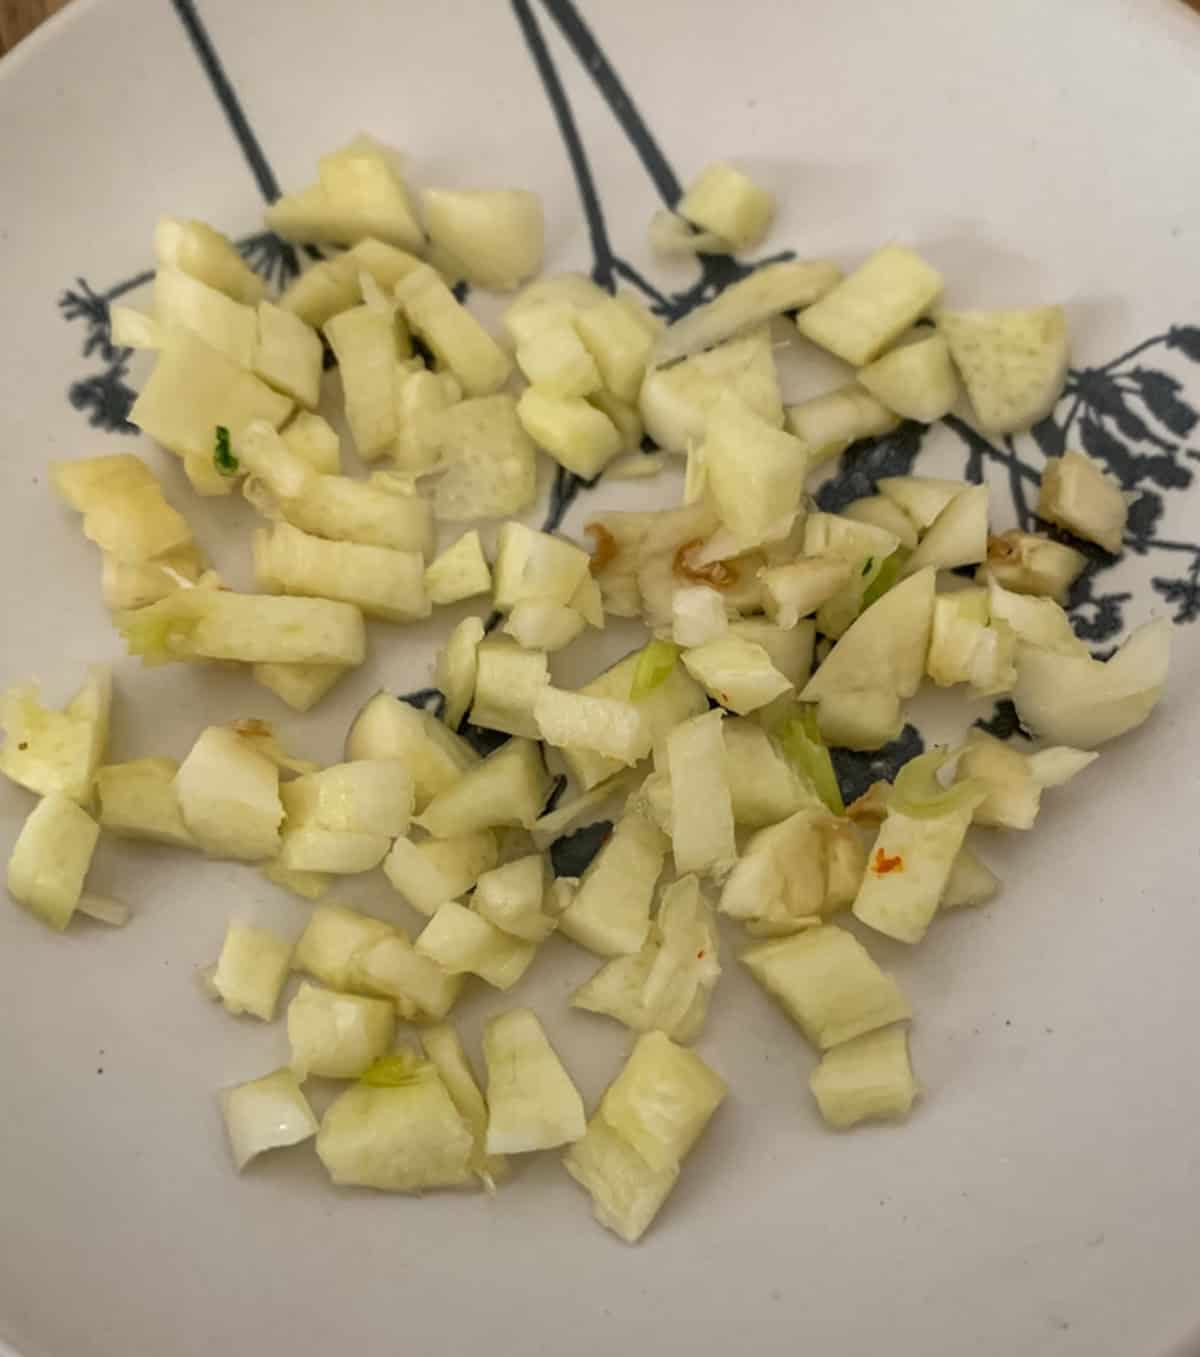 finely chopped garlic in a plate